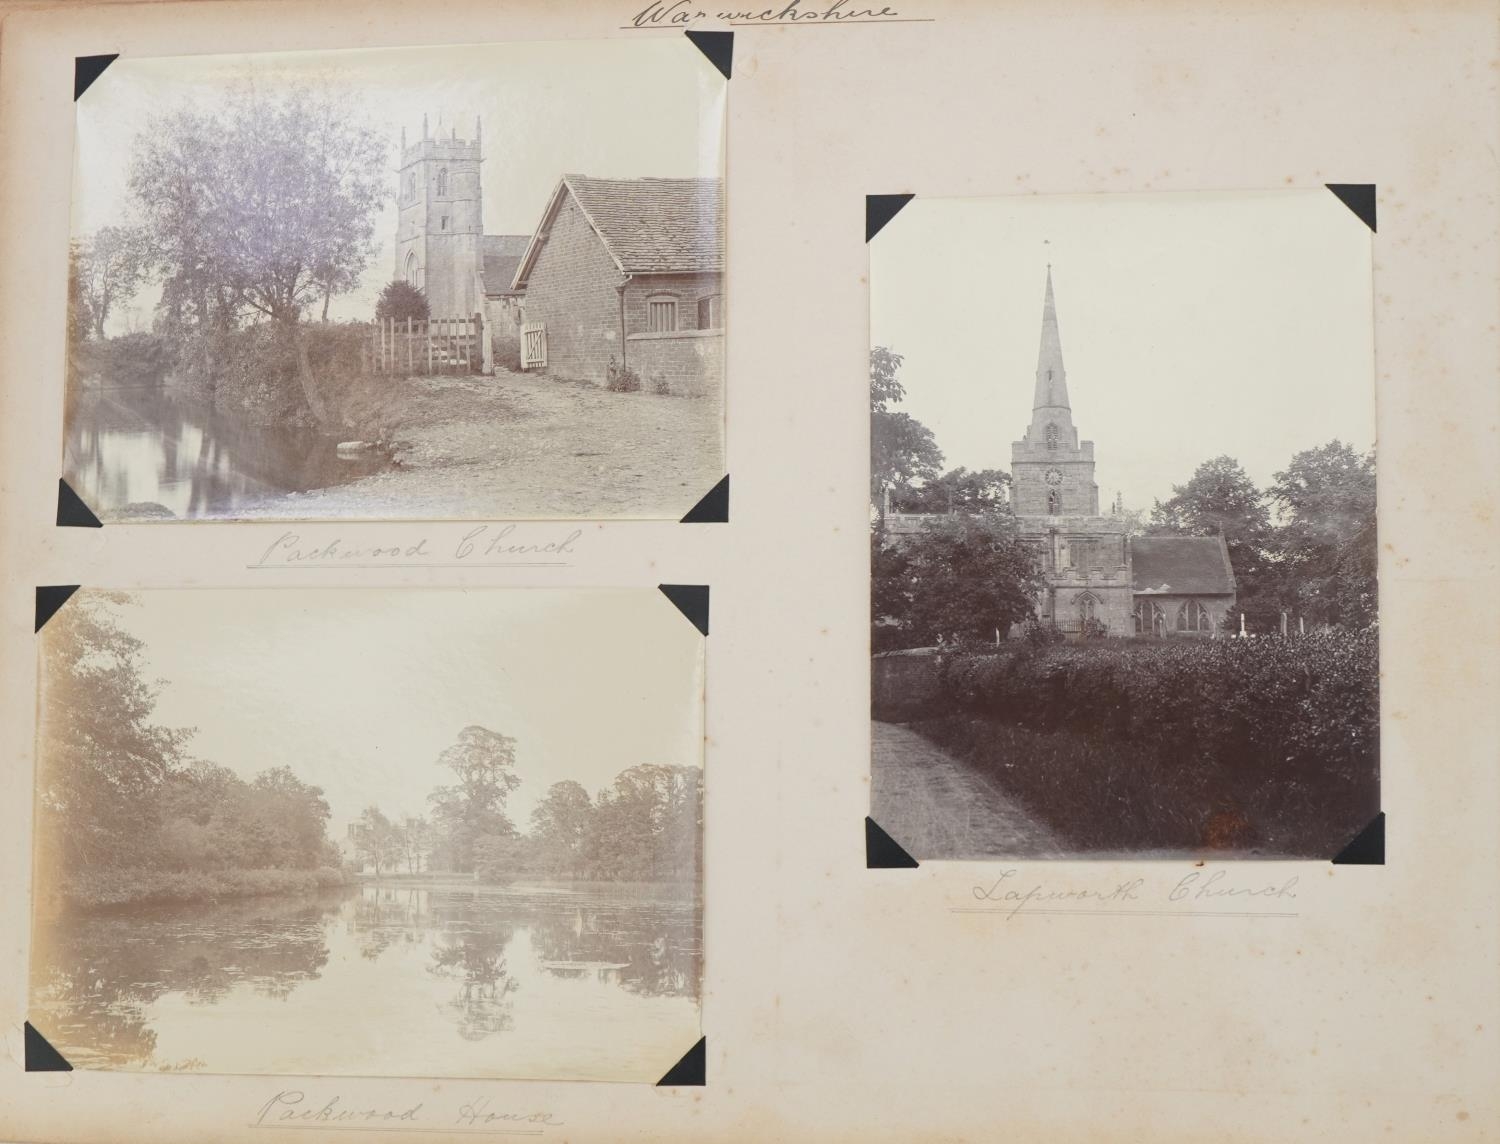 Early 20th century black and white photographs arranged in an album including Staffordshire, - Image 13 of 40